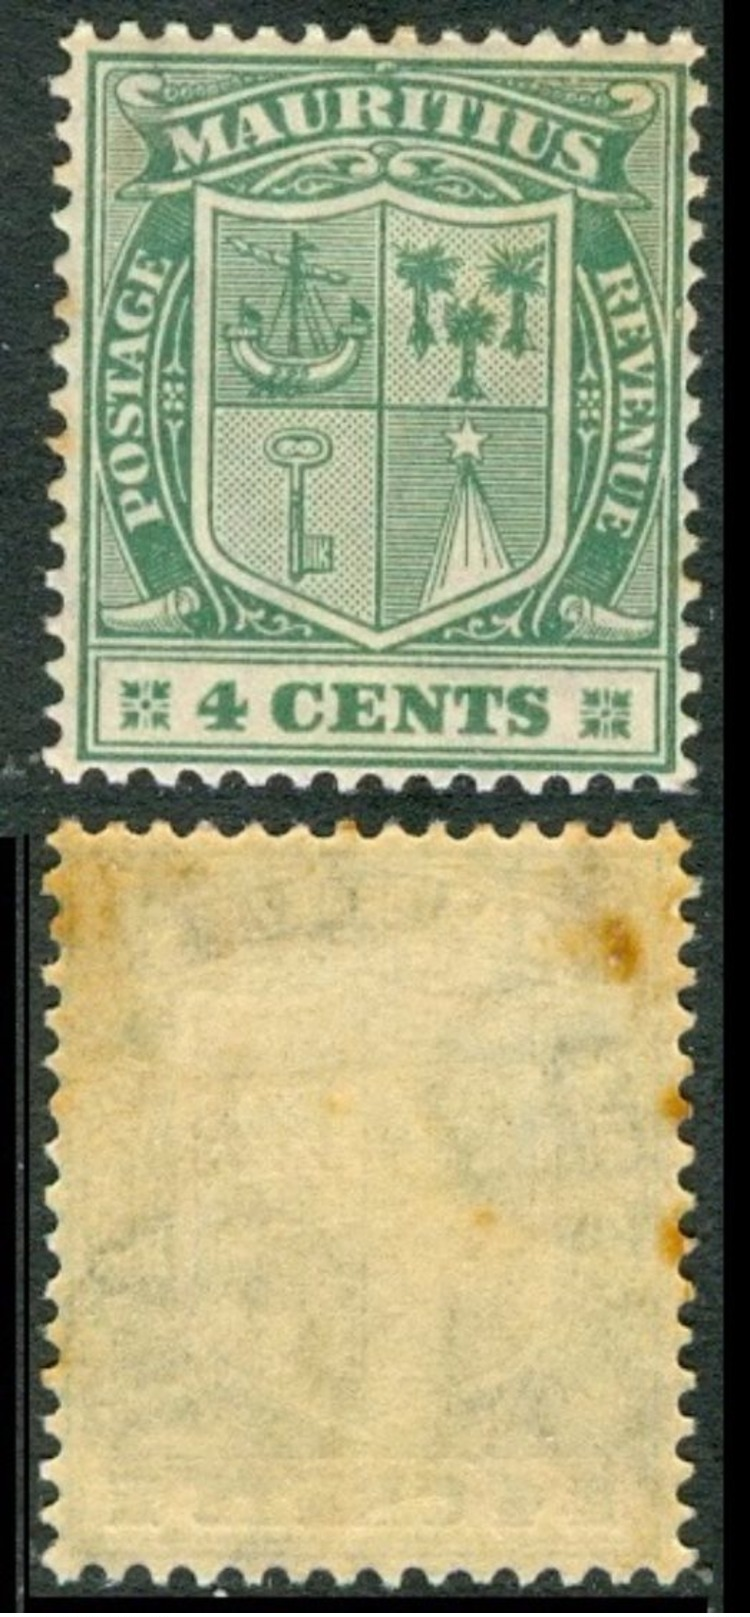 MAURITIUS 1922 Coat Of Arms 4c. Green, VF MNH, MiNr 157, SG 210 - Oceania (Other)